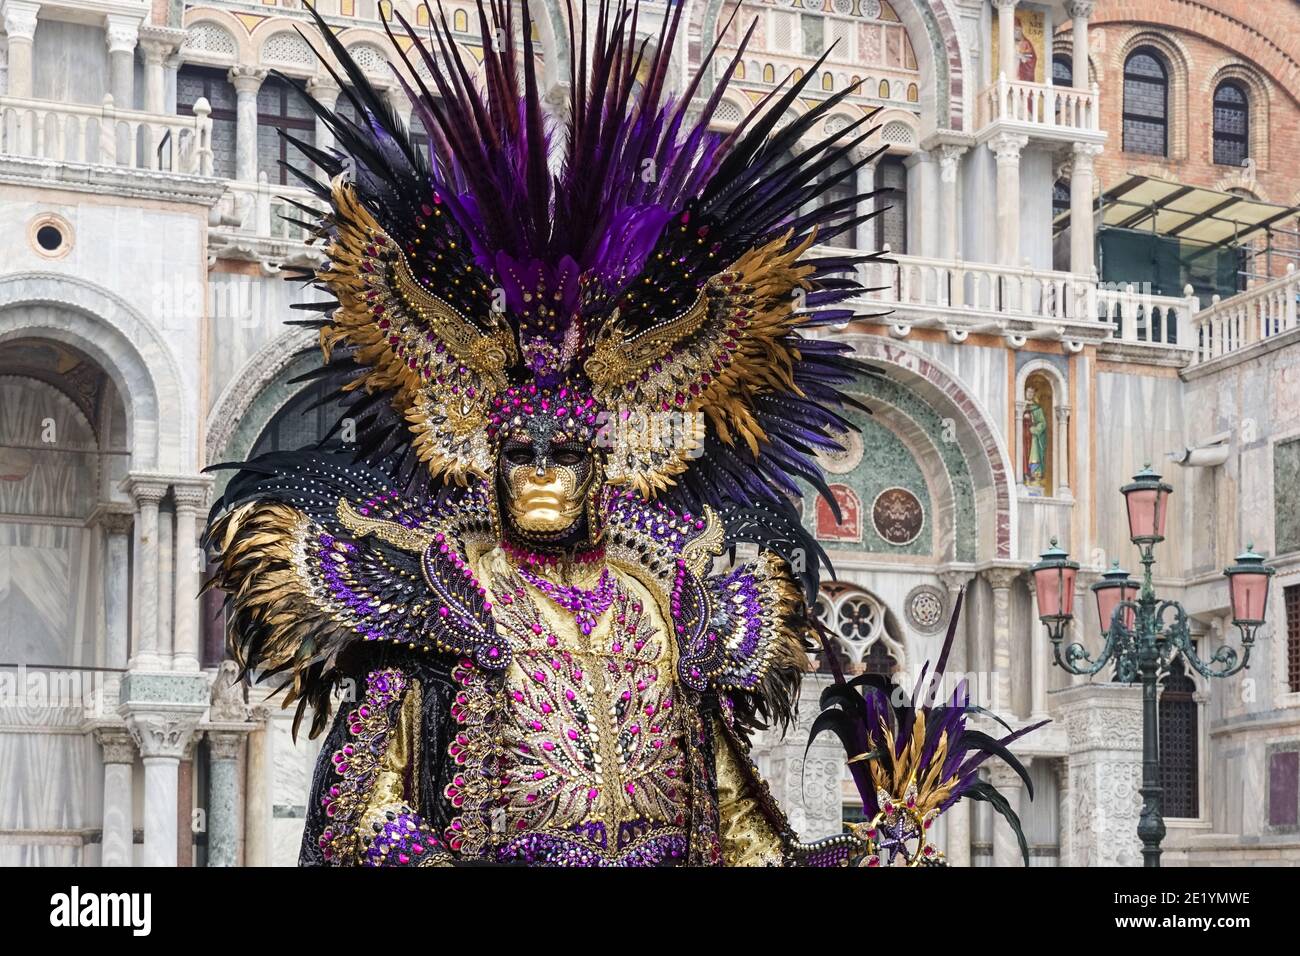 Man dressed in traditional decorated costume and painted mask during the Venice Carnival in Venice, Italy Stock Photo